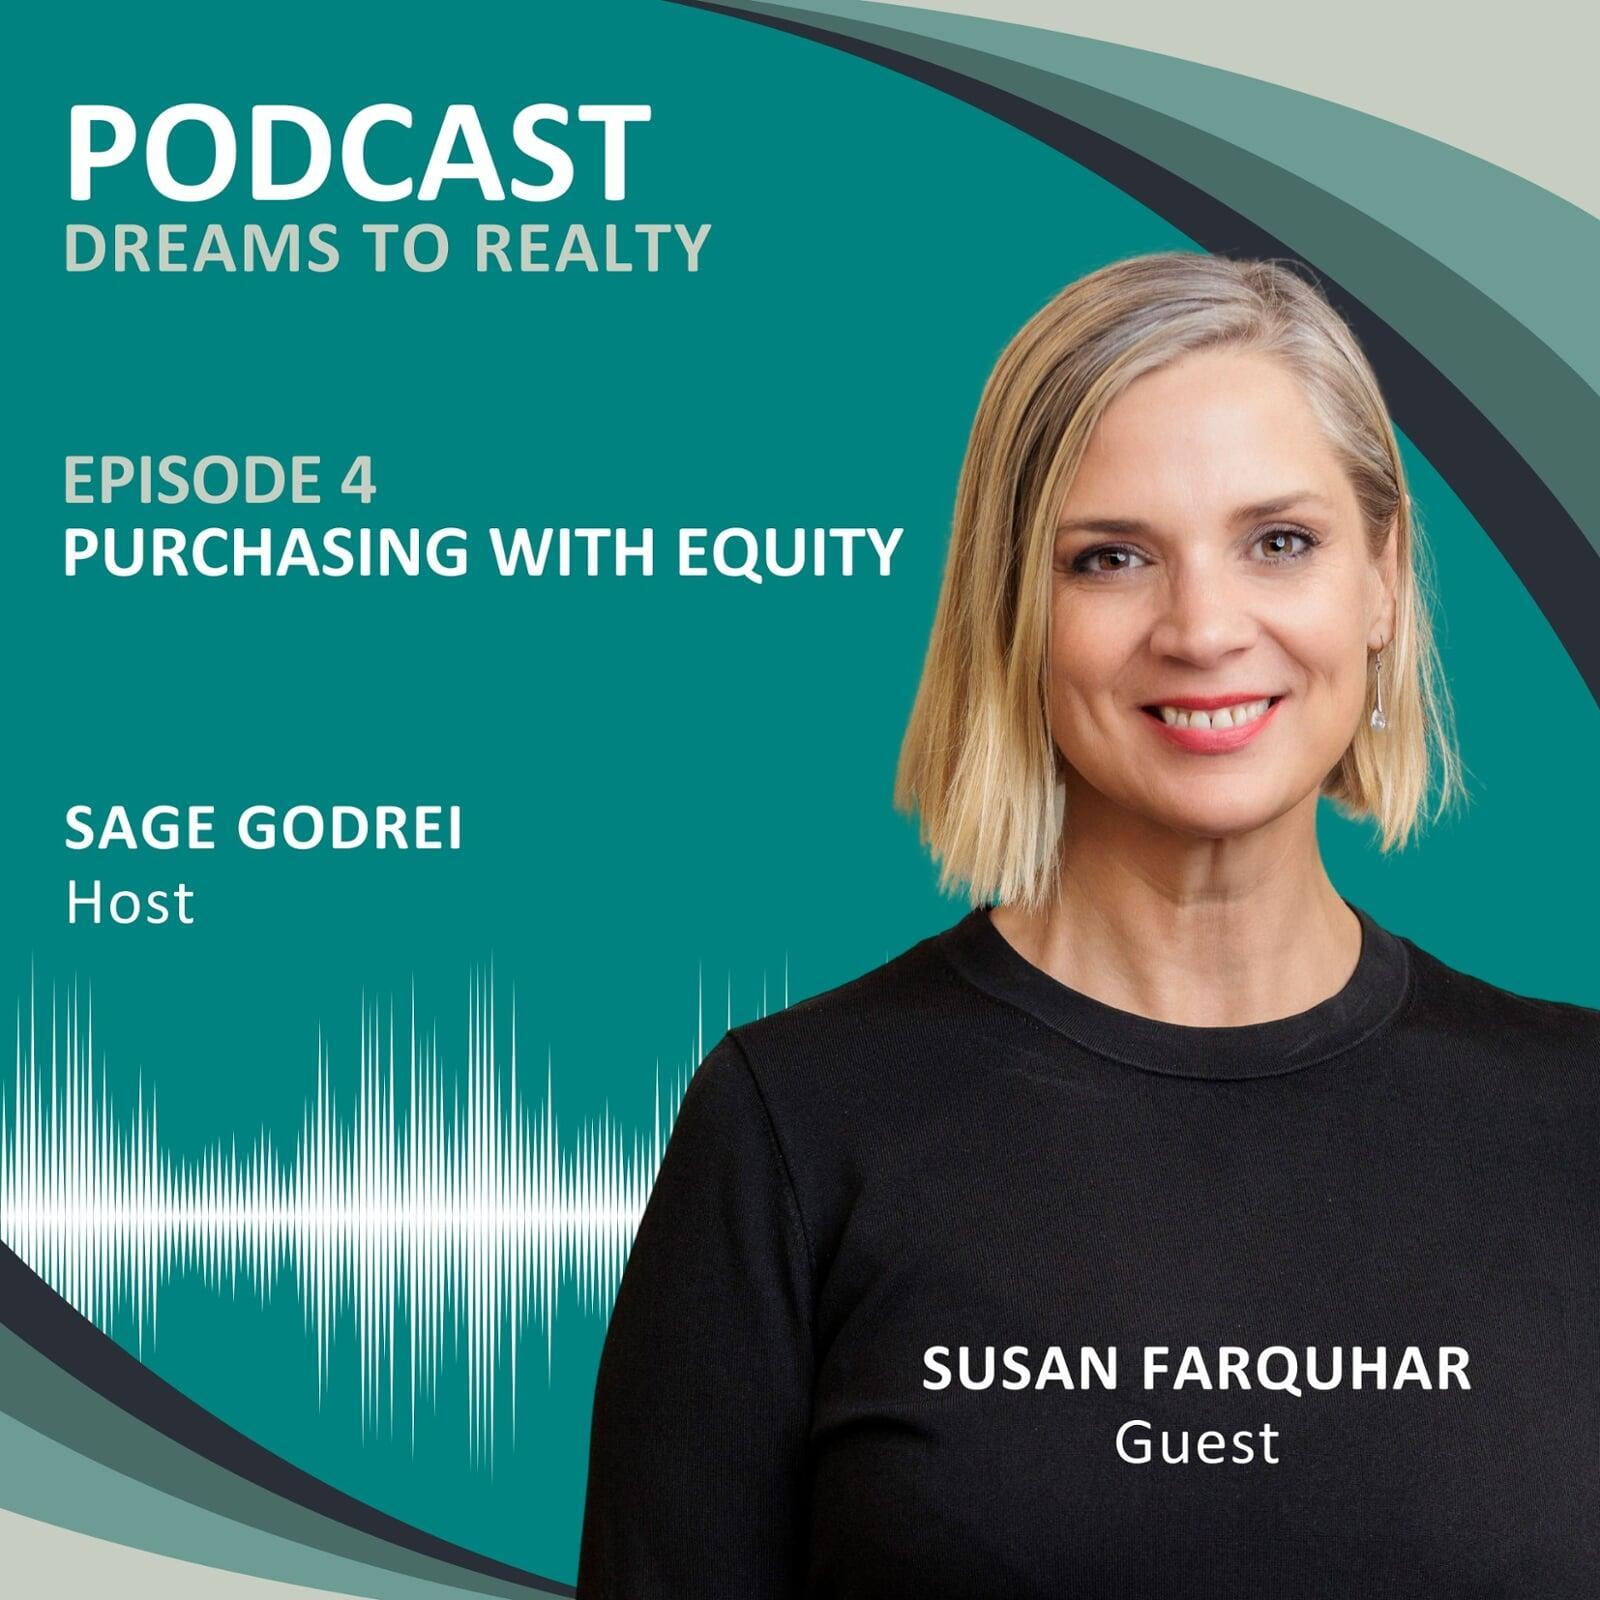 PODCAST: Dreams to Realty Property Investment Insights - Episode 4 Purchasing With Equity